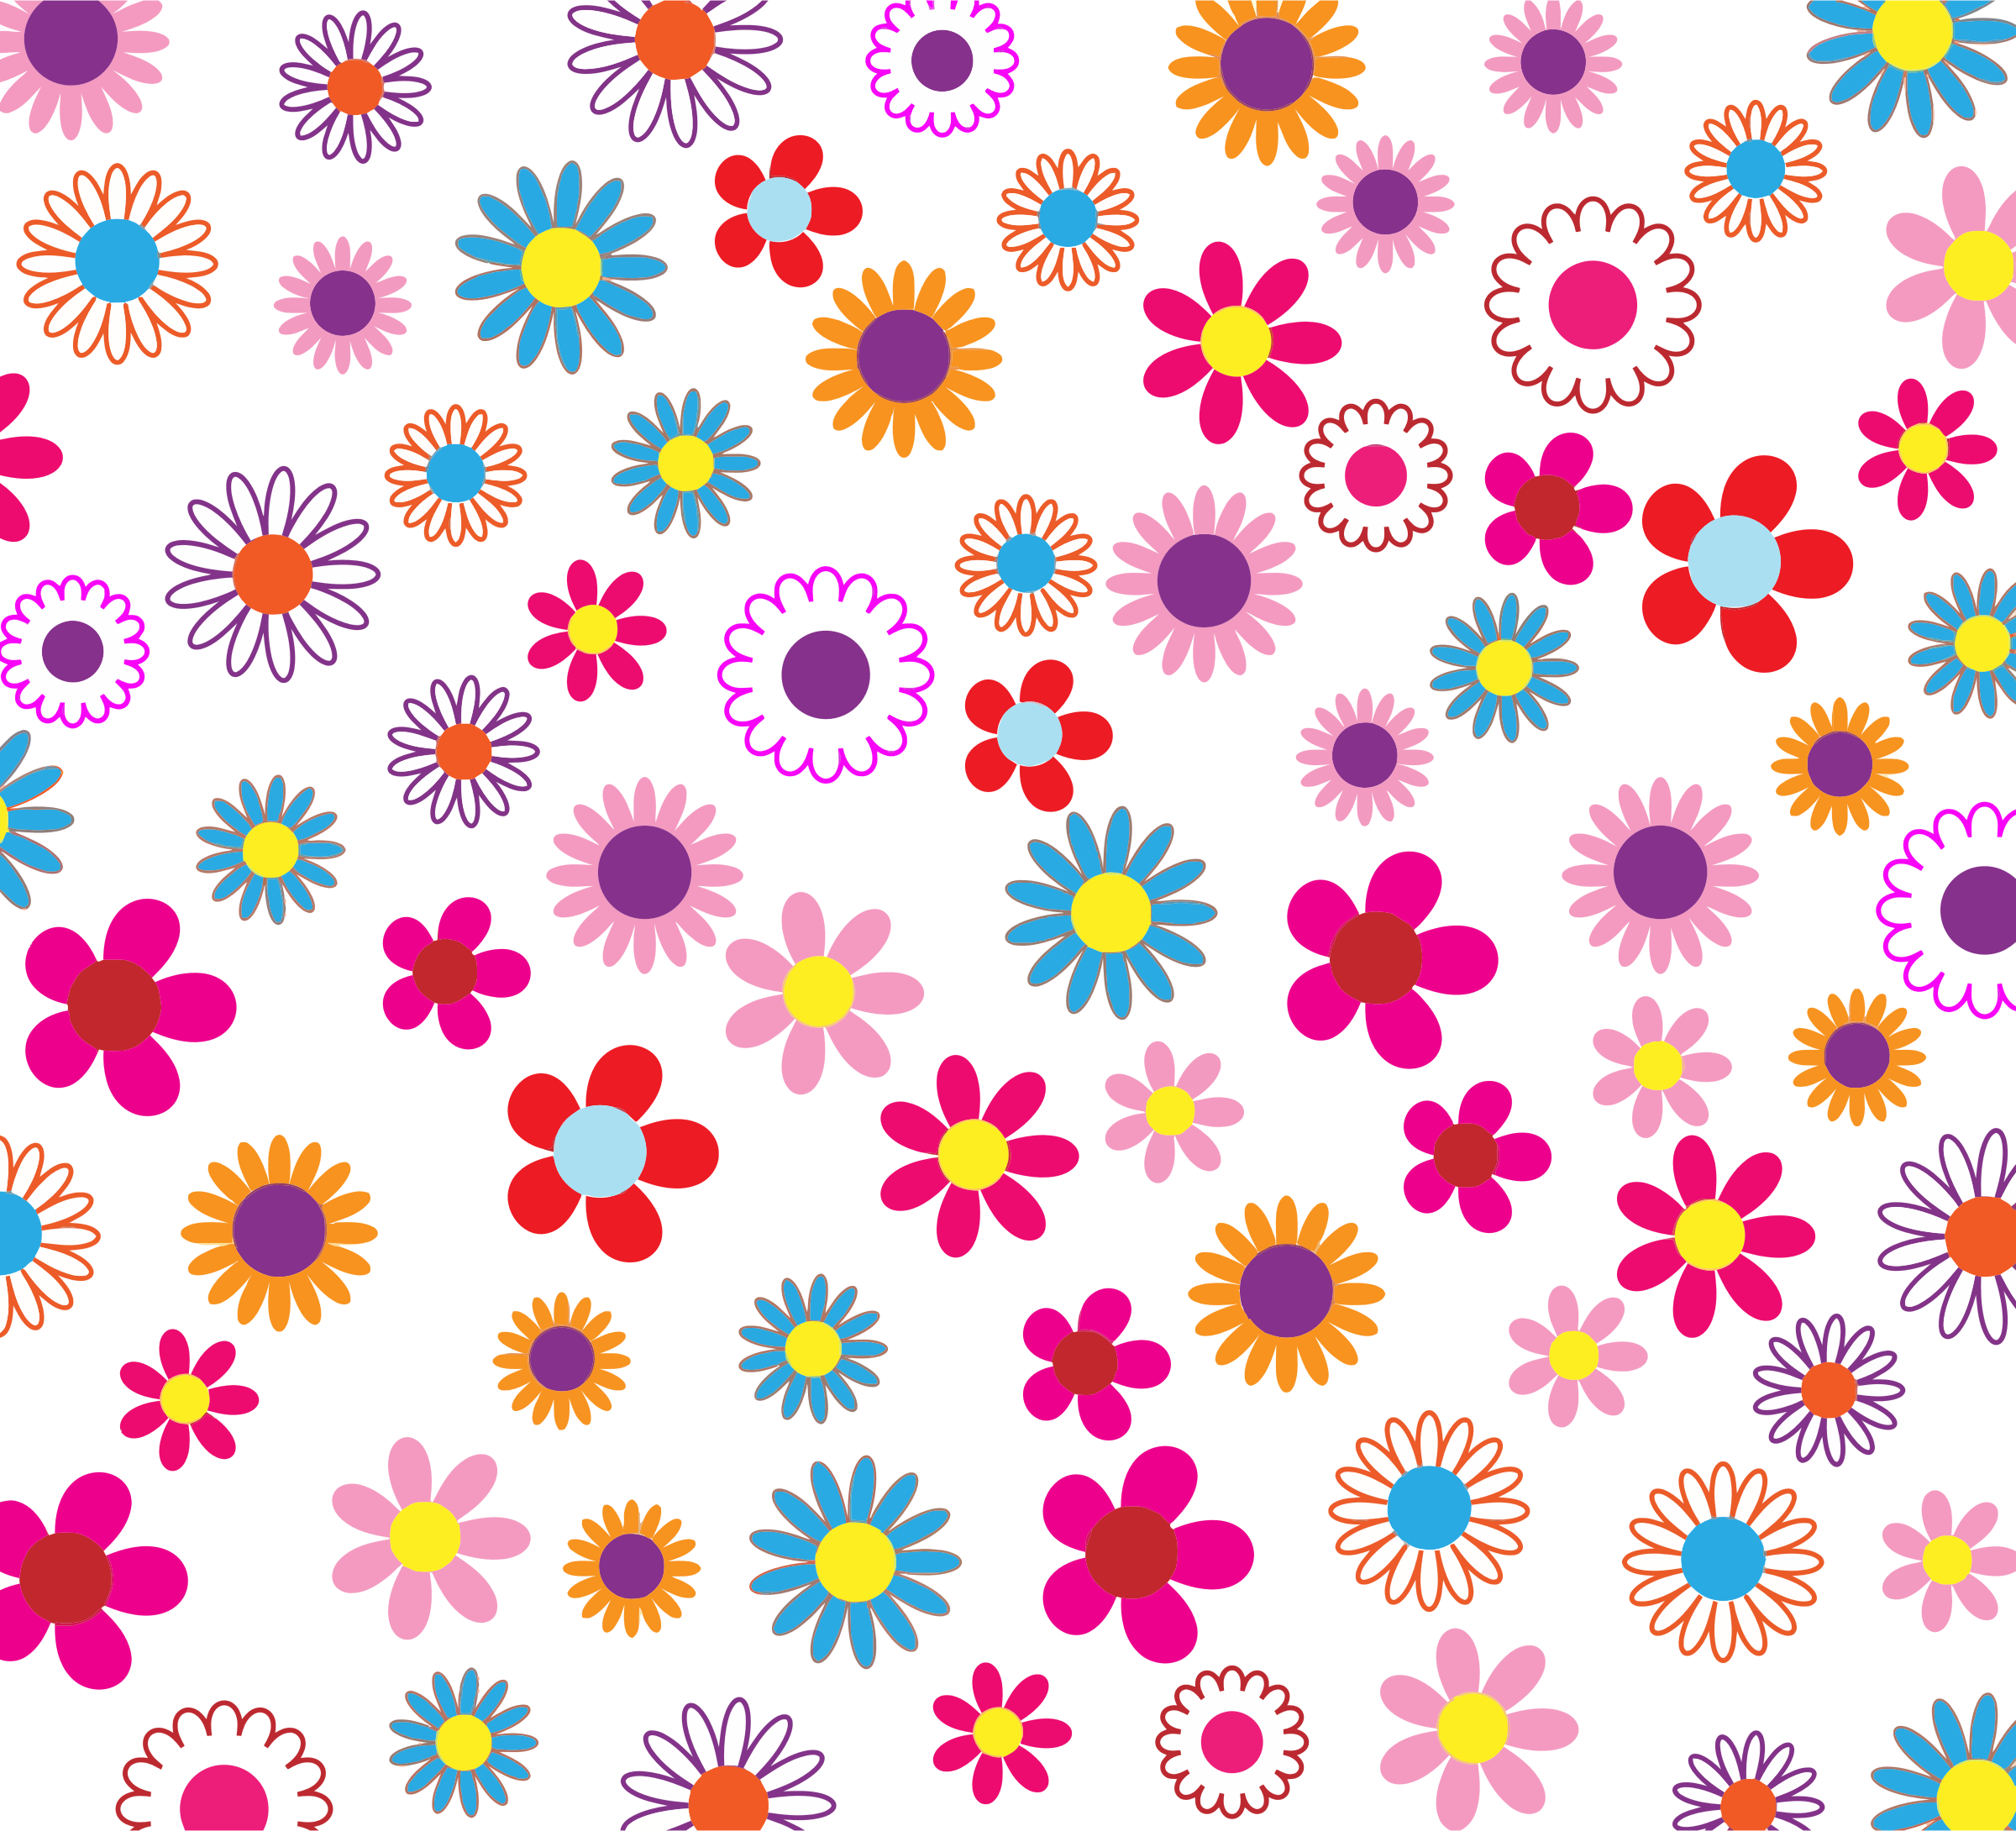 Background Floral Cliparts for Your Creative Projects | Clipart Library